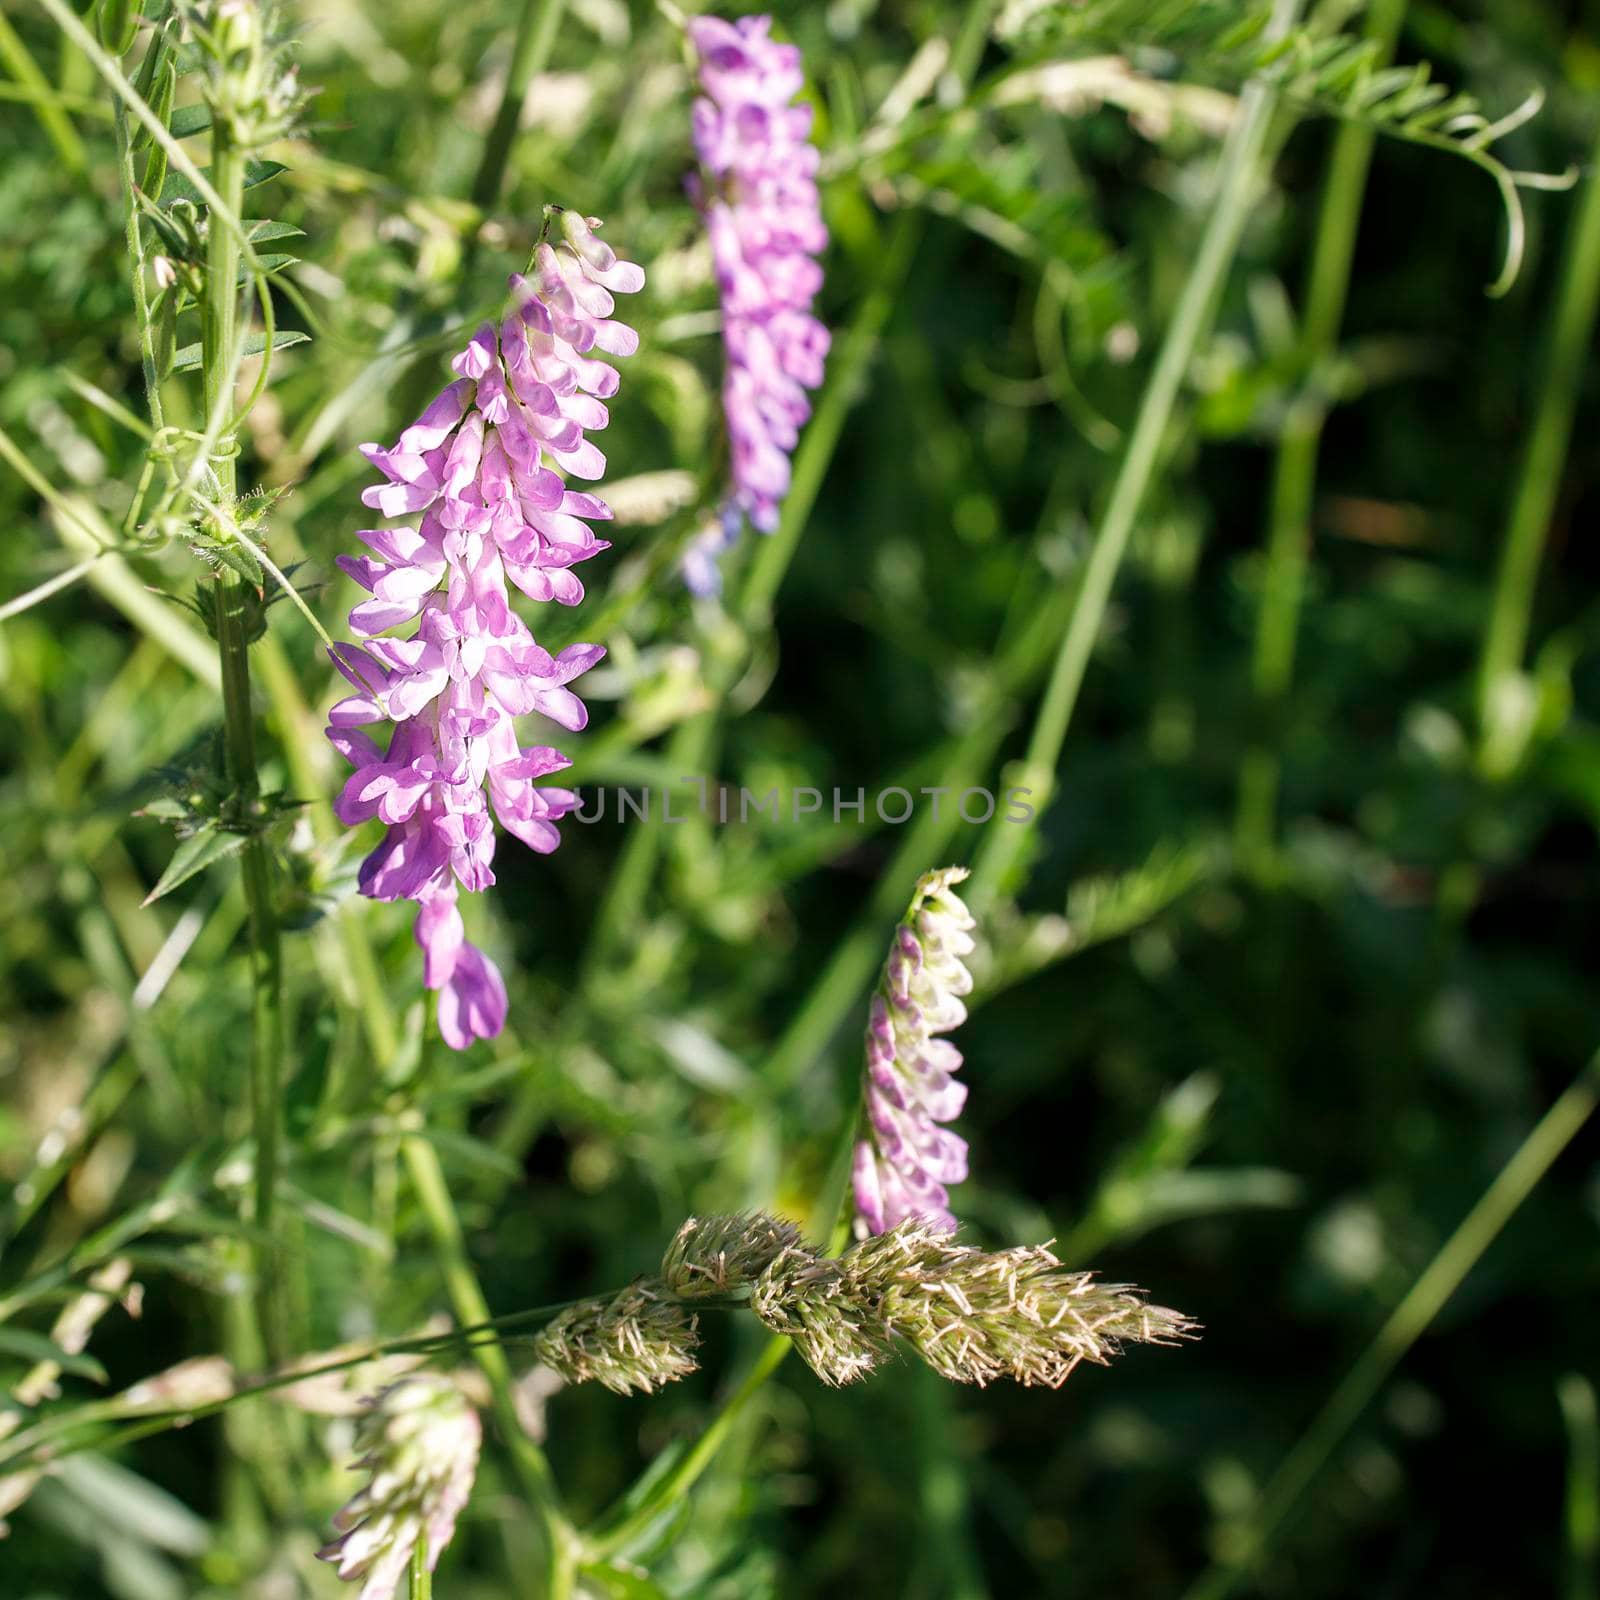 Field of Vicia cracca, is a species of vetch native to Europe and Asia. Square frame